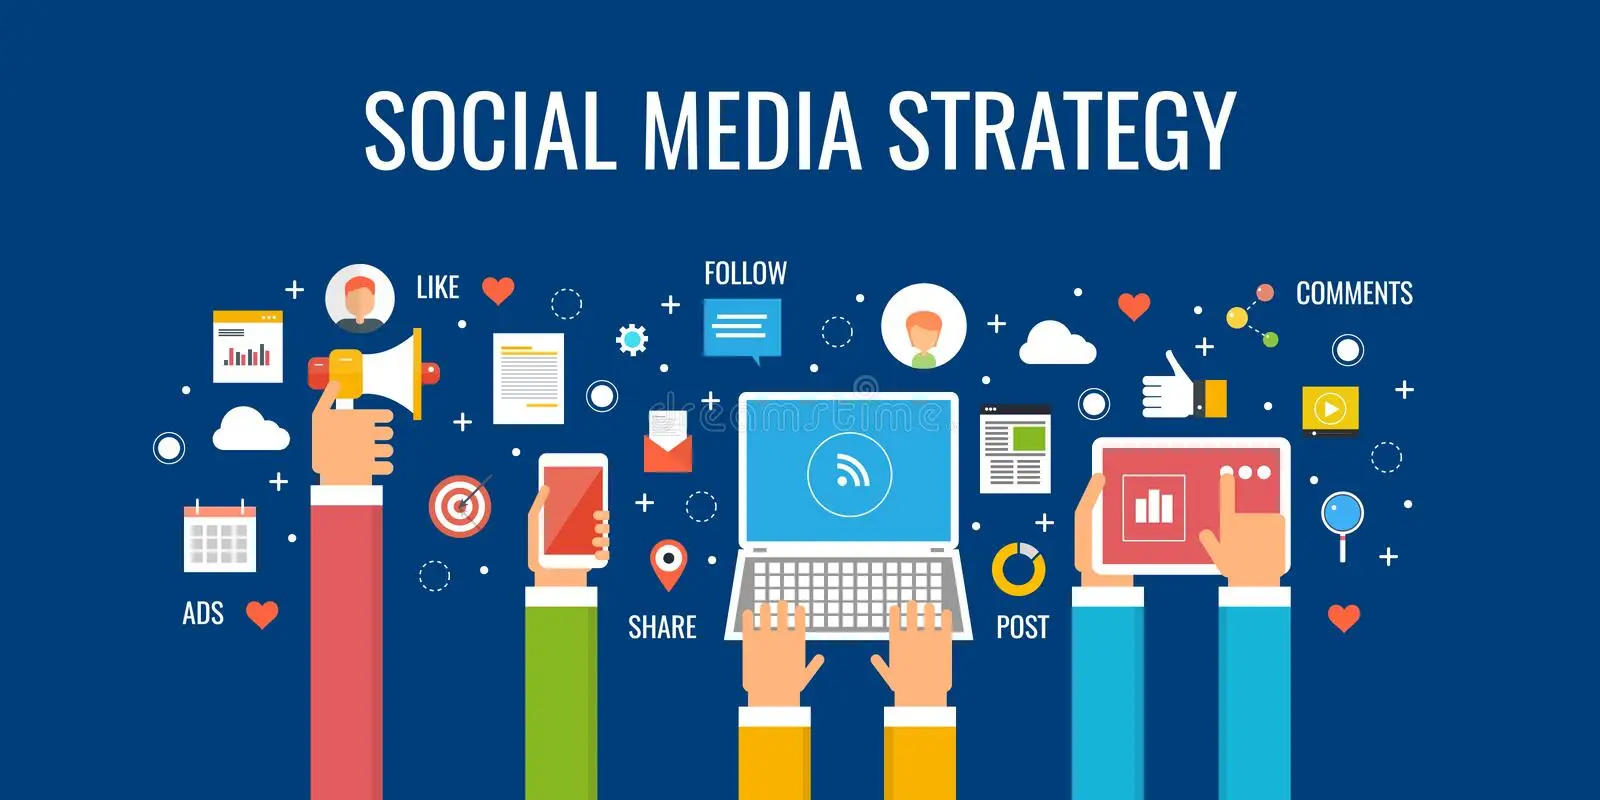 8 Effective Social Media Strategies for Business Growth